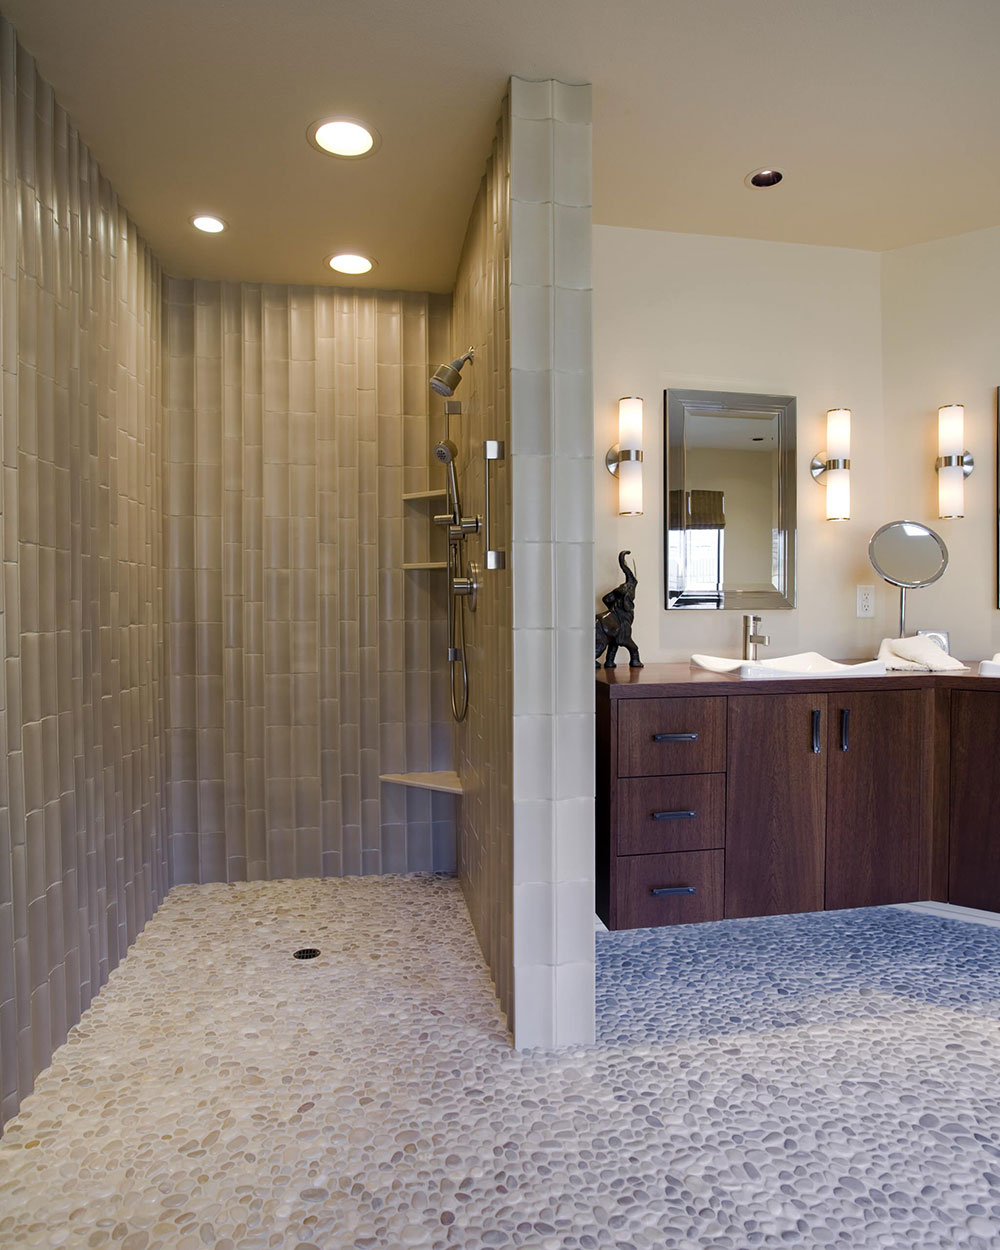 Huff-by-Kaufman-Homes-Inc How to clean the shower floor and have it squeaky clean